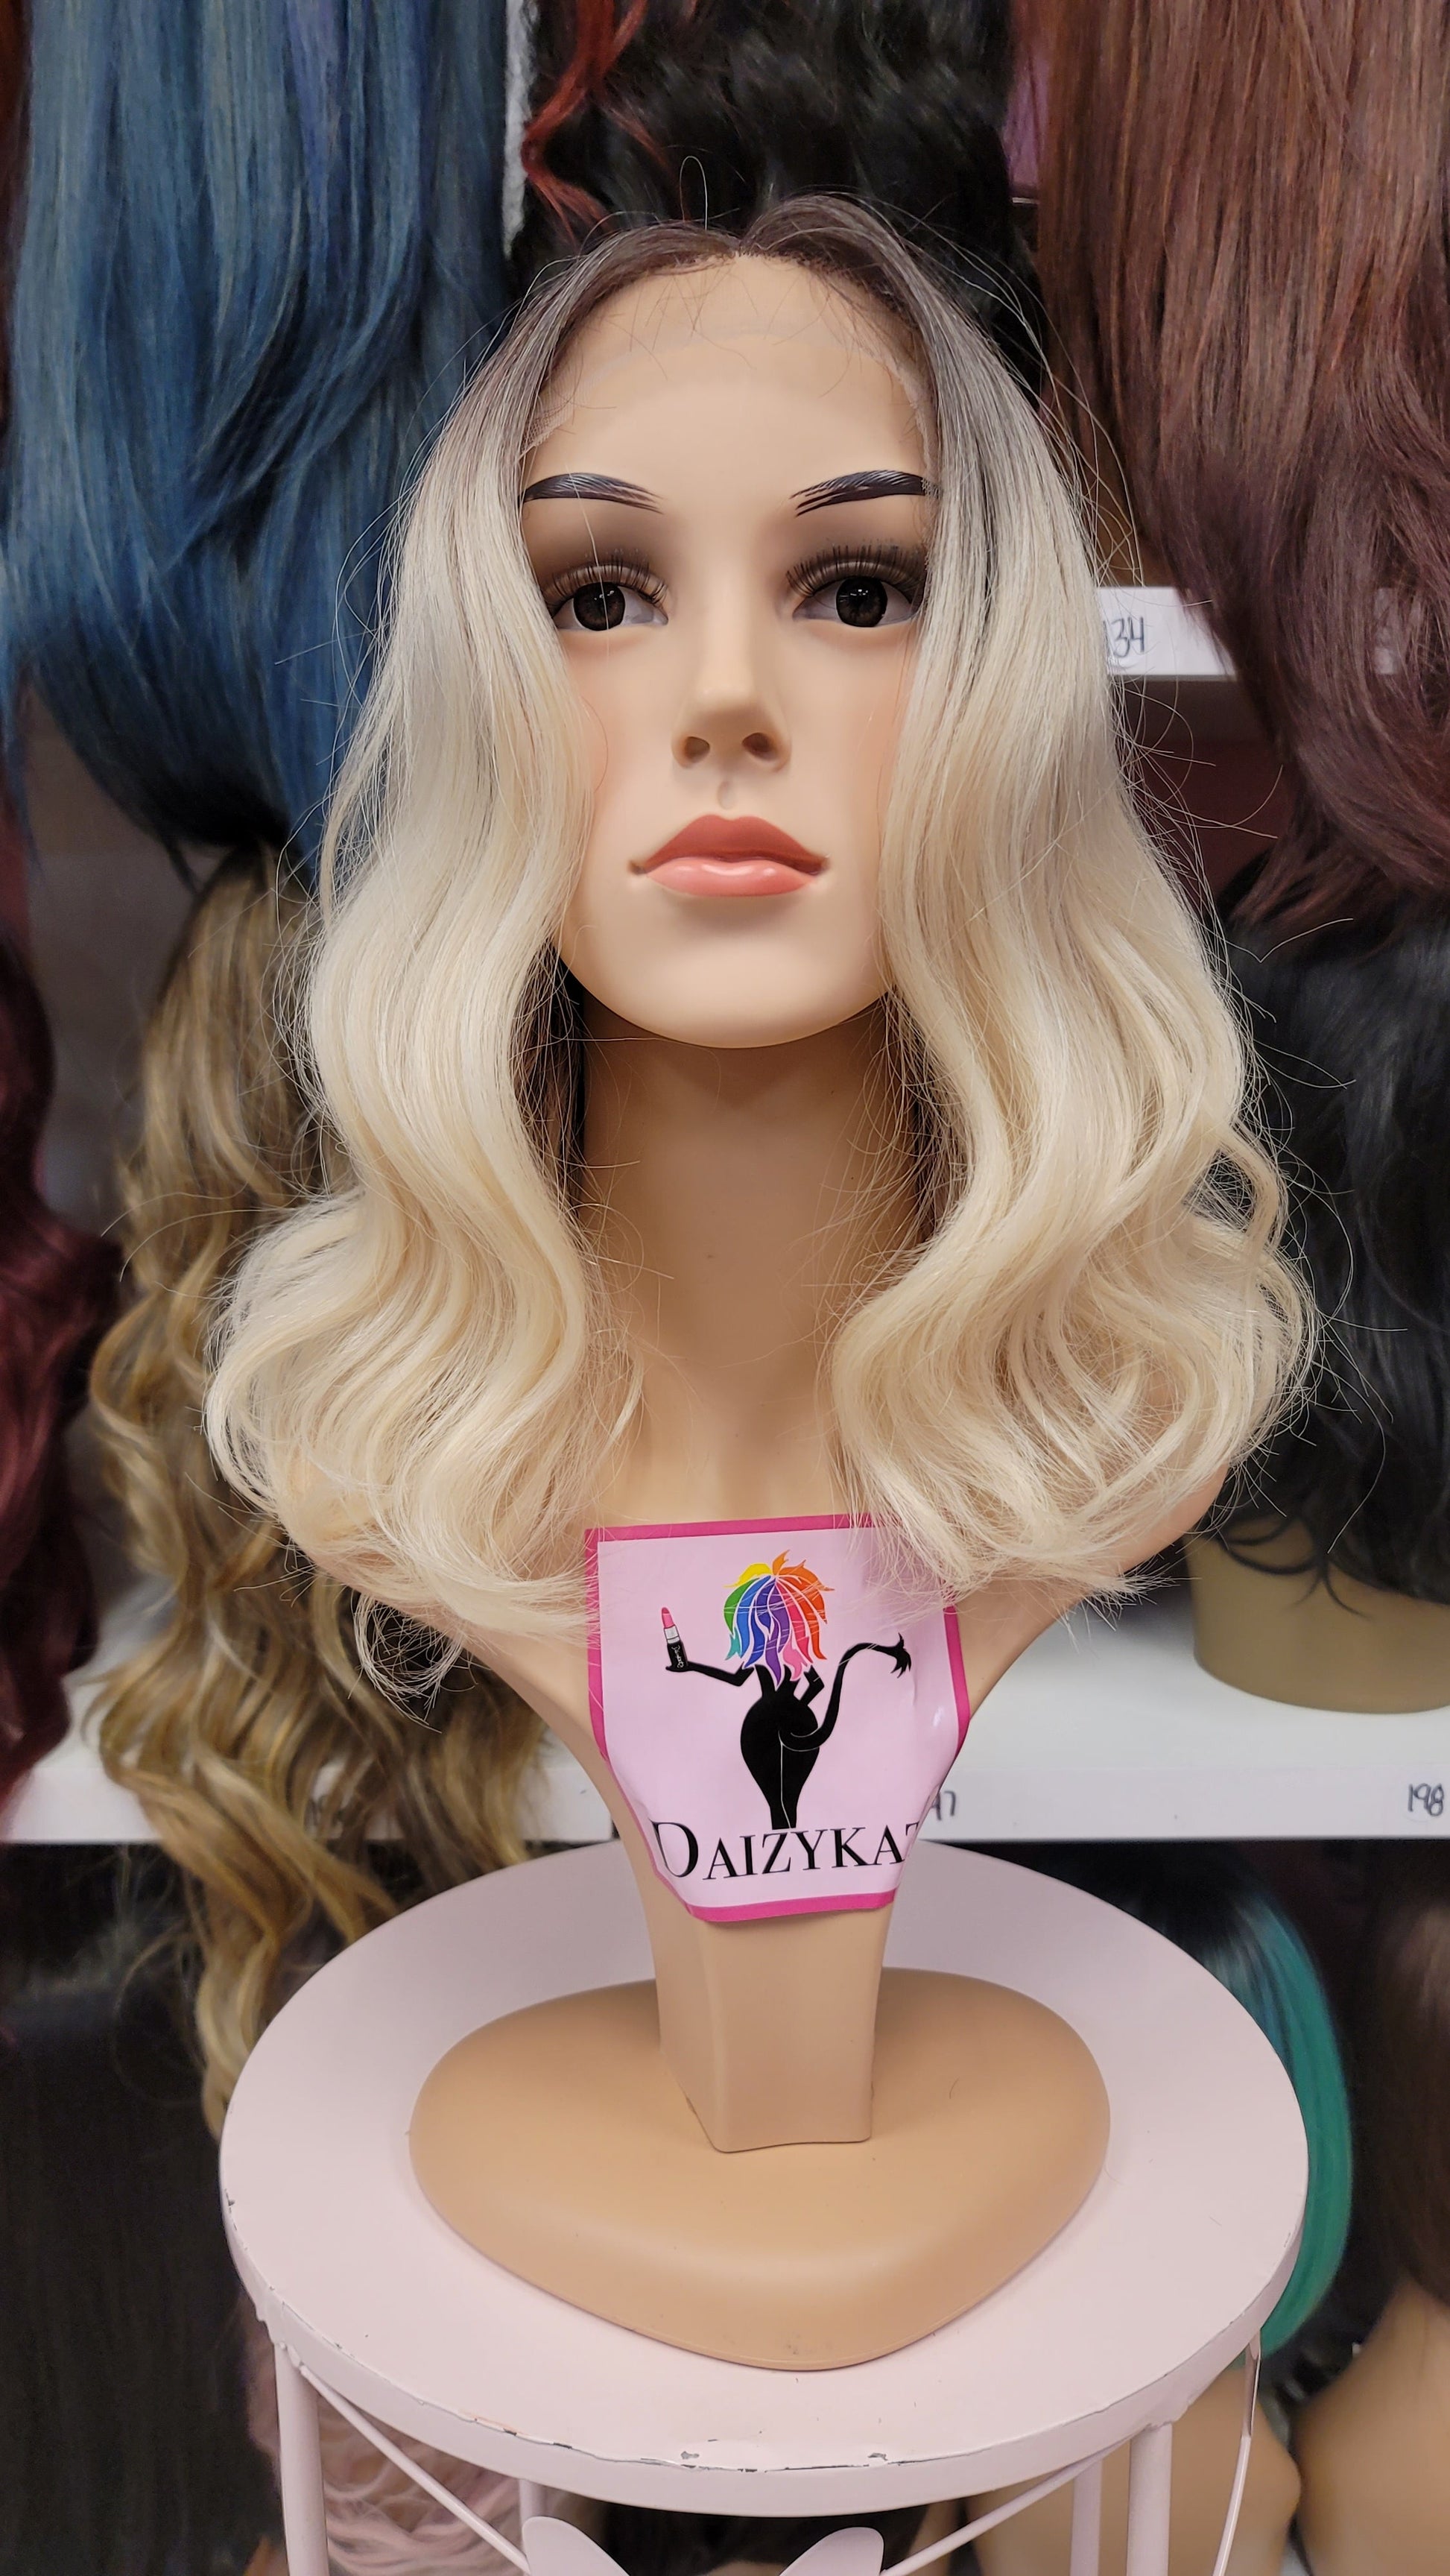 47 JADE - Middle Part Lace Front Wig - 4/BLONDE - DaizyKat Cosmetics 47 JADE - Middle Part Lace Front Wig - 4/BLONDE DaizyKat Cosmetics Wigs